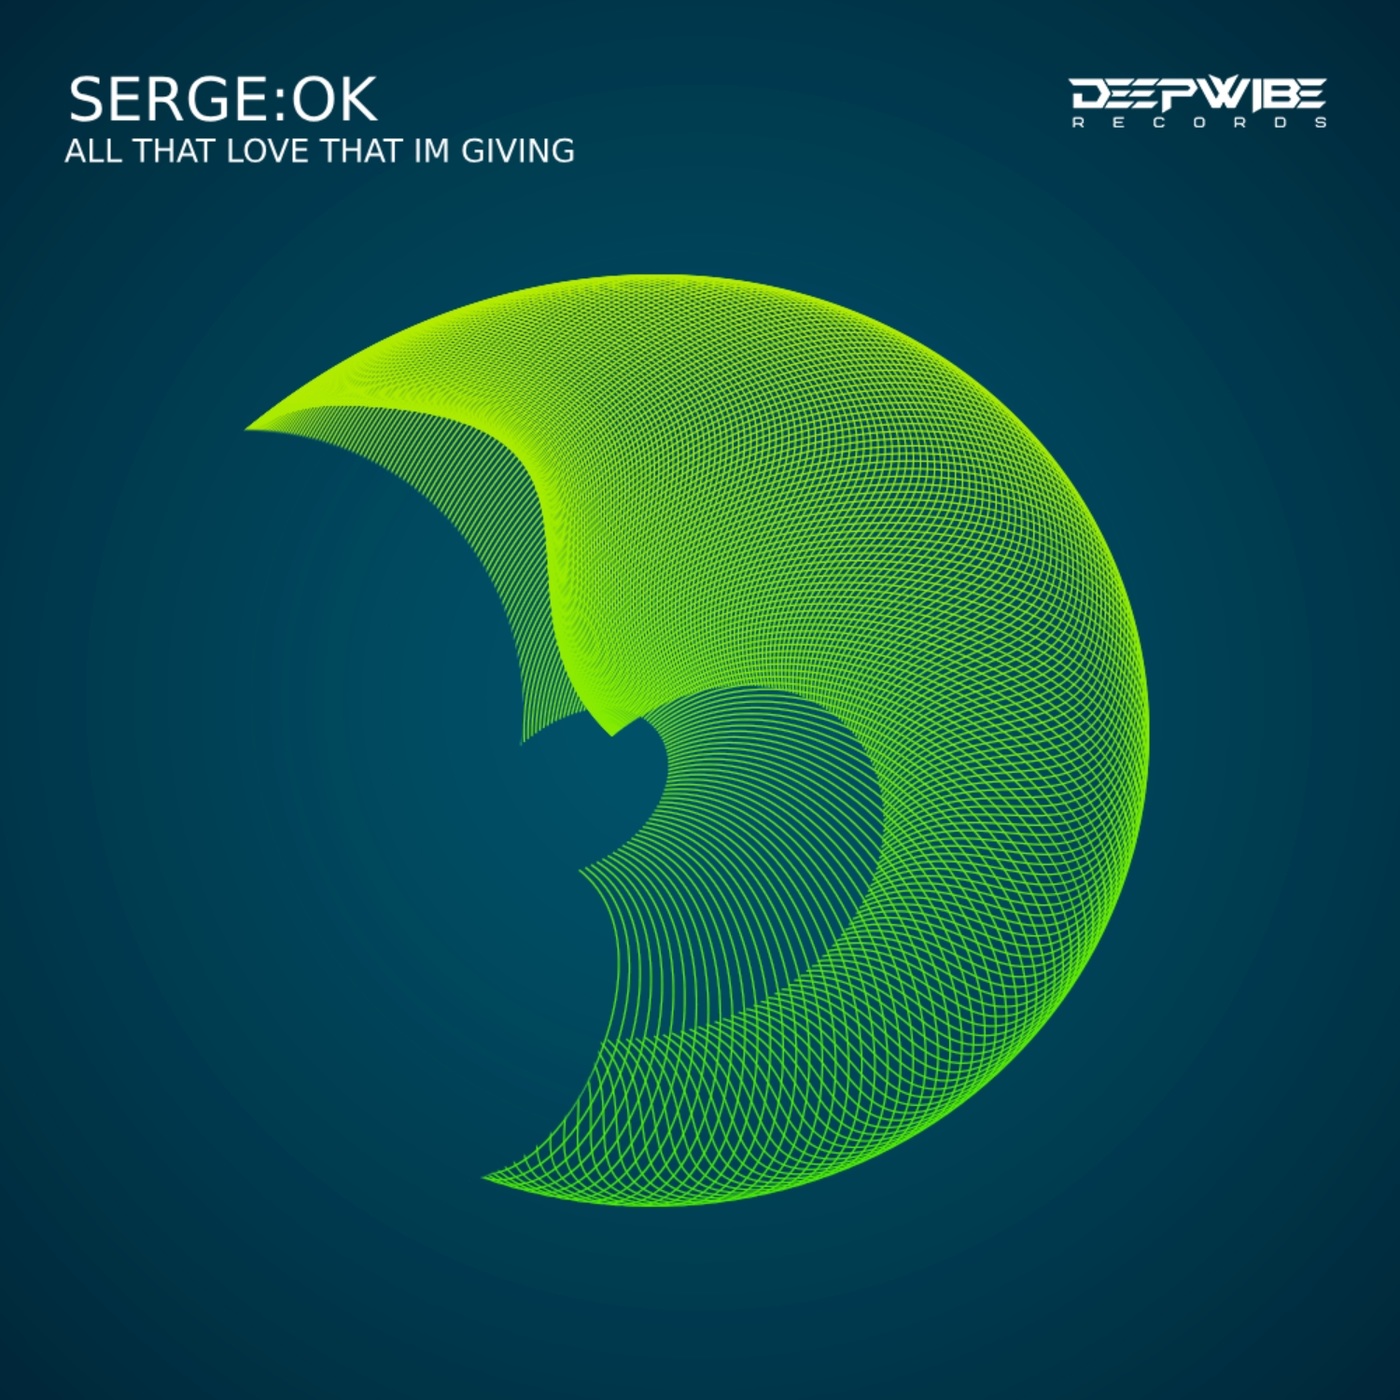 Serge:Ok - All This Love That Im Giving / Deepwibe Records